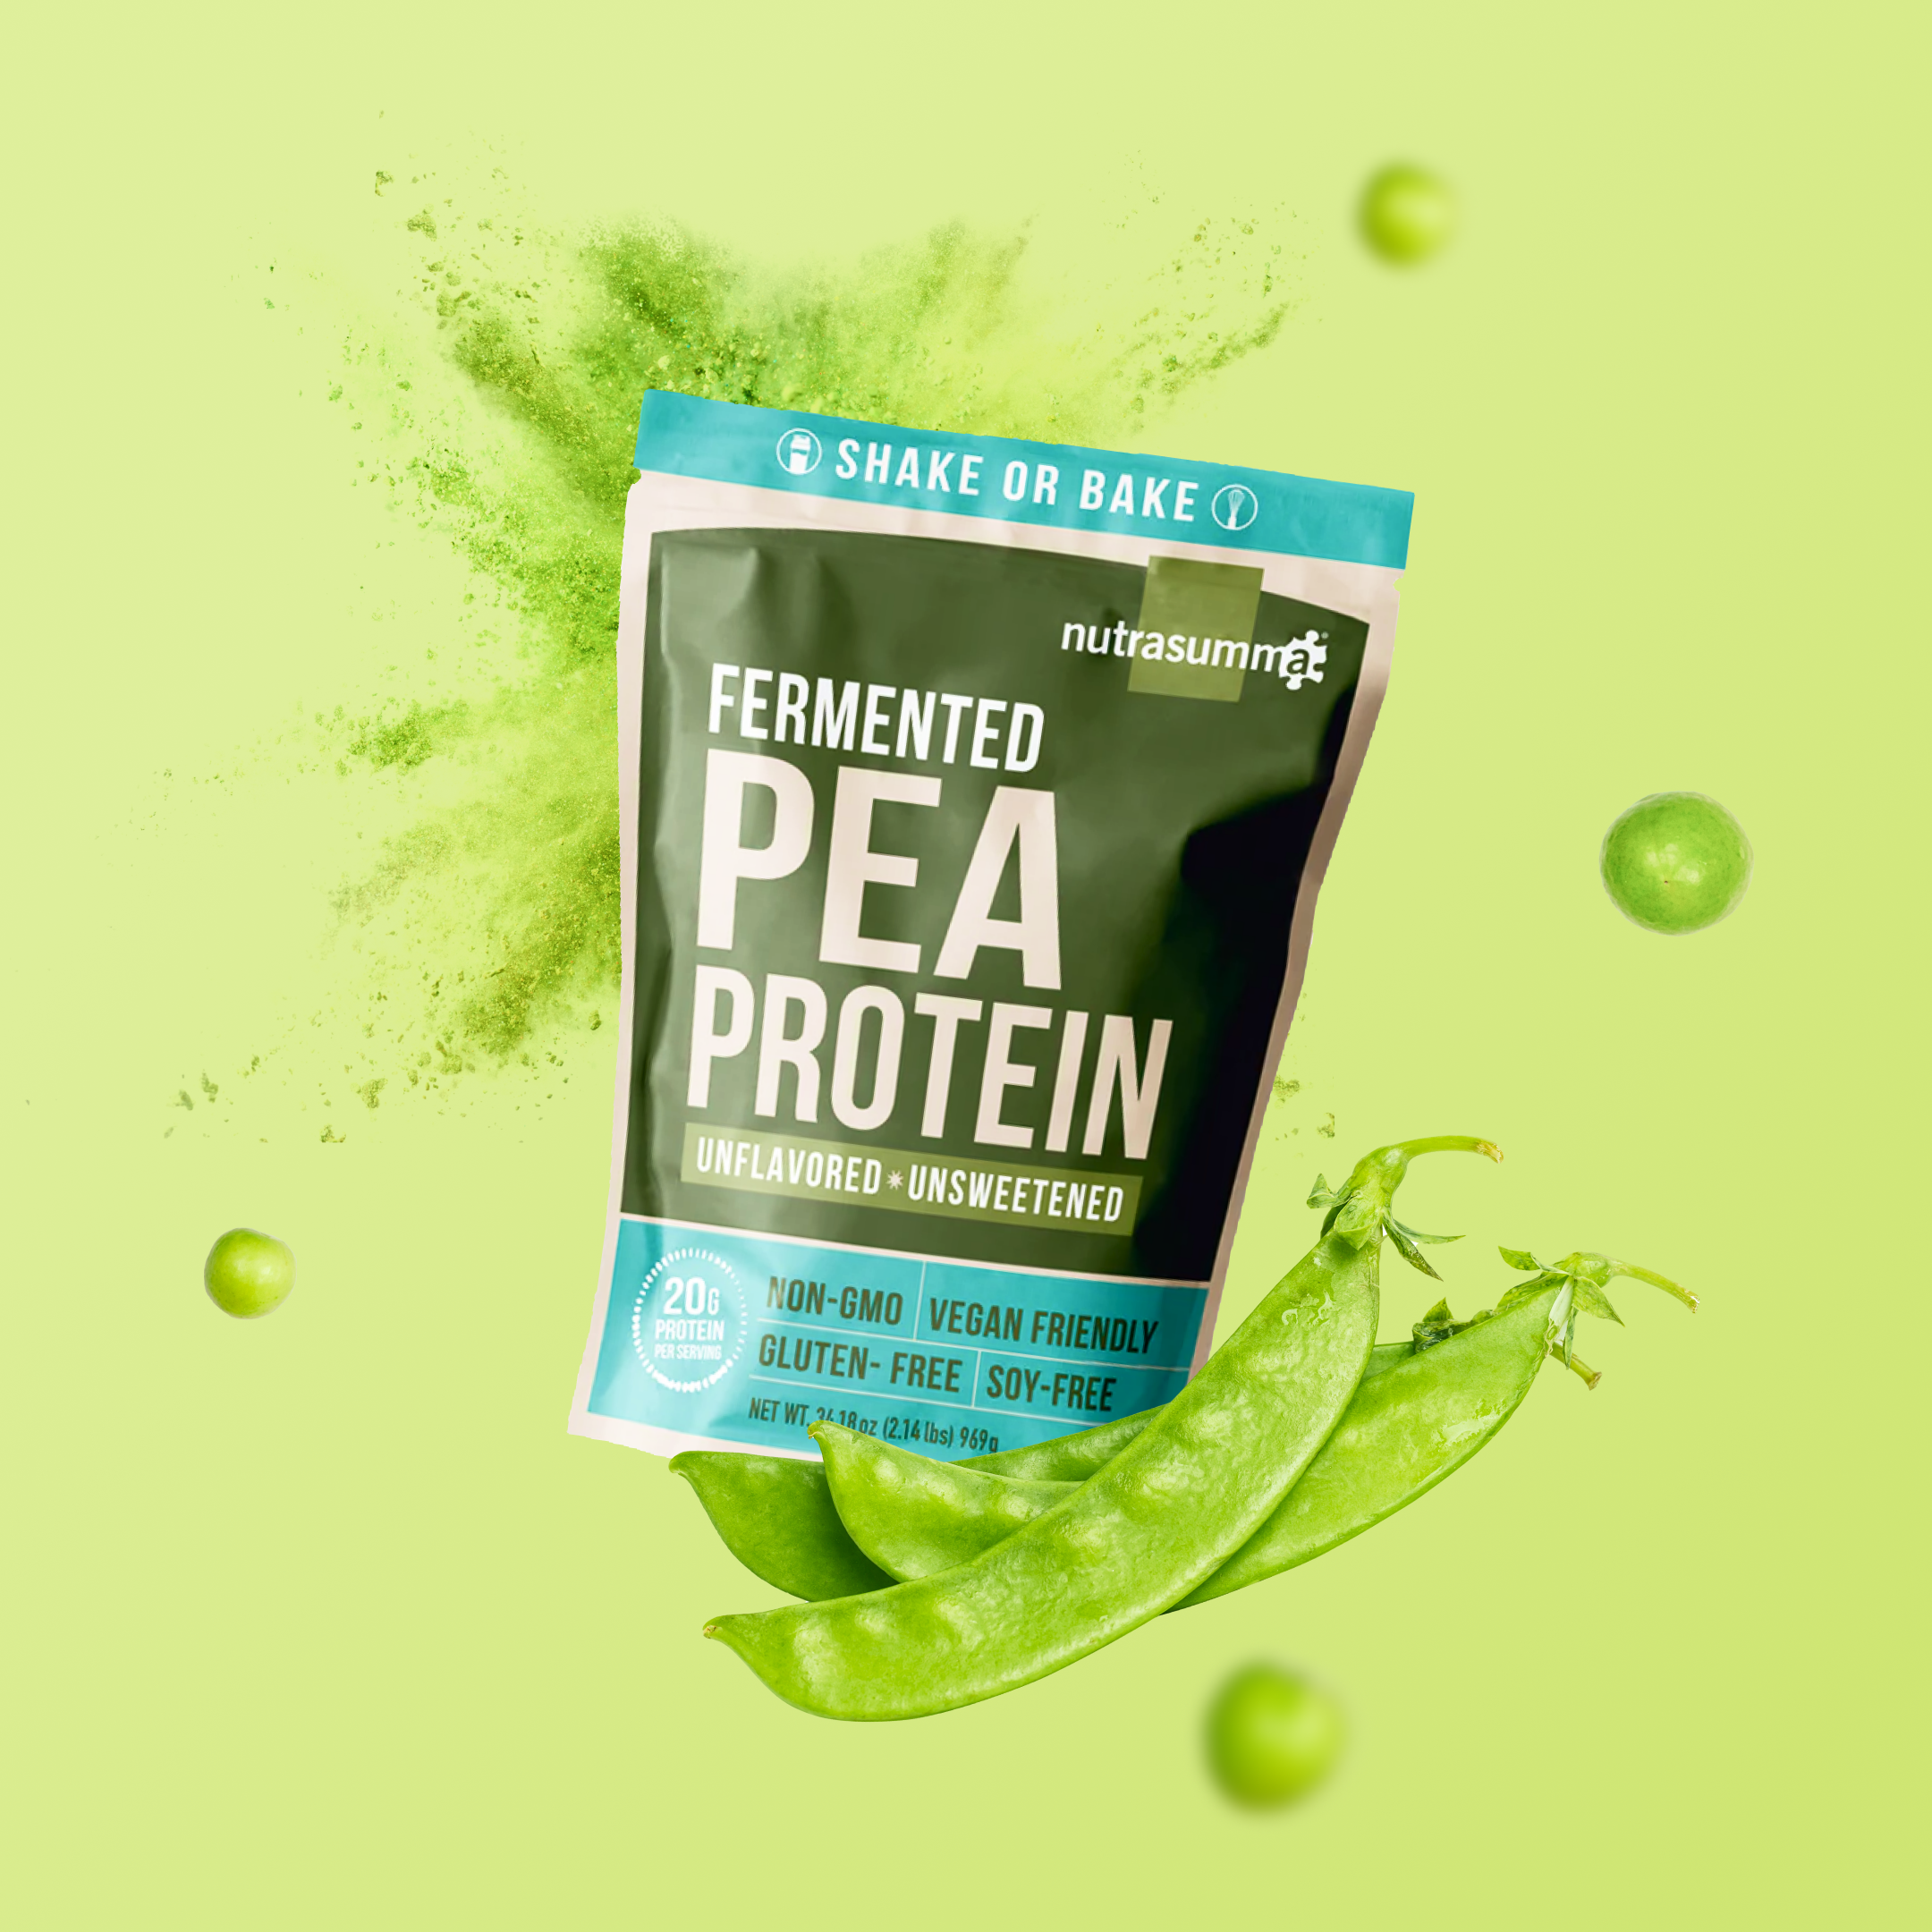 Fermented Pea Protein 2.14 lb Pouch - Unflavored & Unsweetened